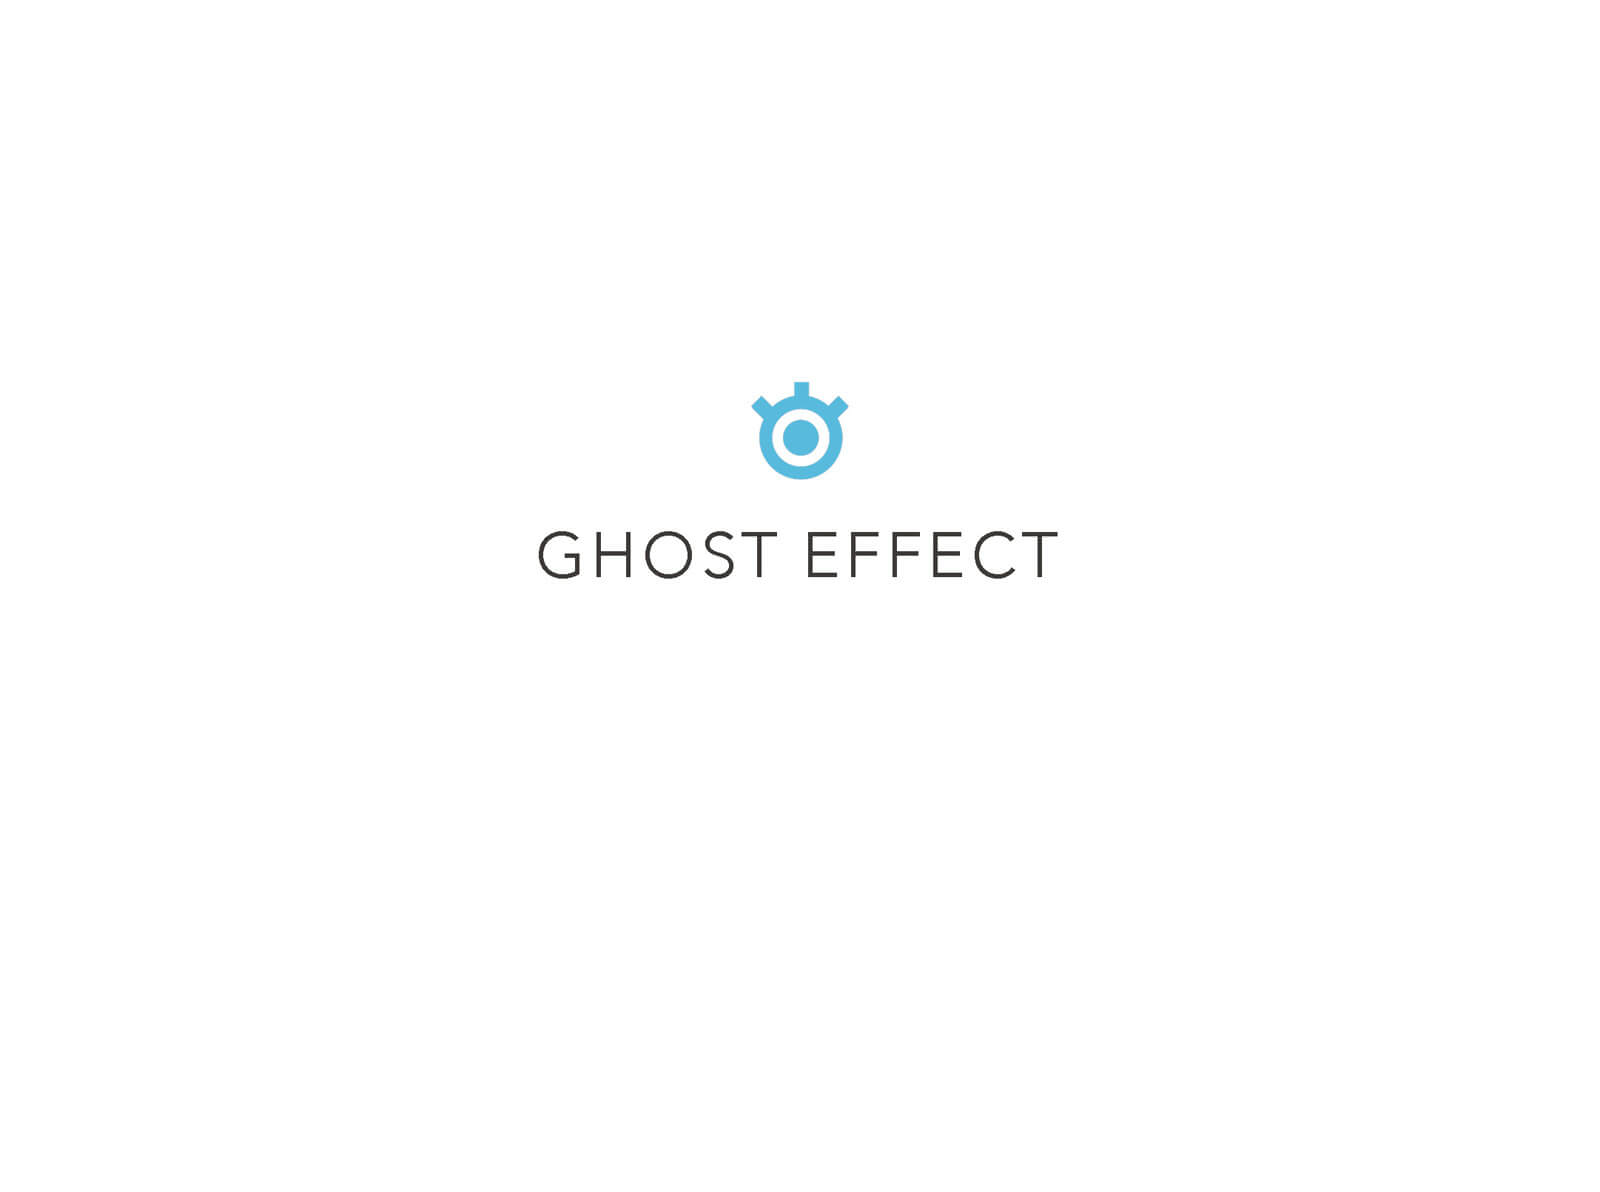 Presentation slide for the short film Orientation Center for the Unseen, white background with text reading "GHOST EFFECT"